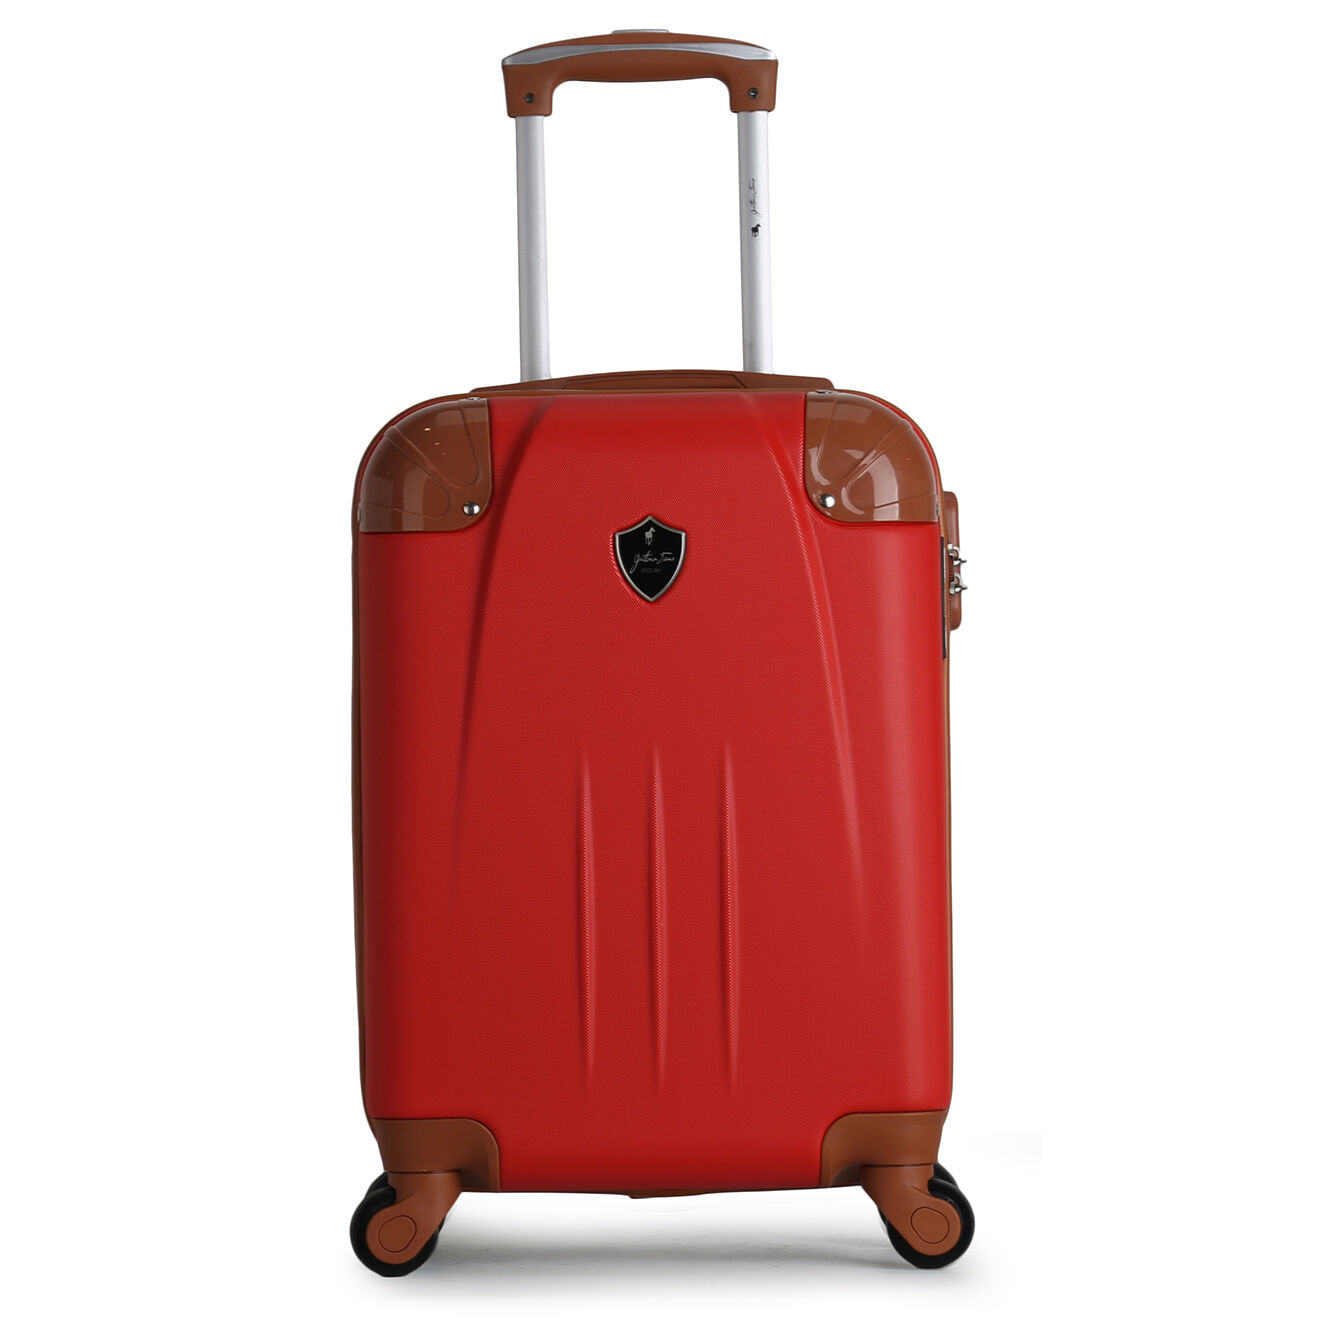 Valise Cabine 4 roues Henry-E 55 cm rouge